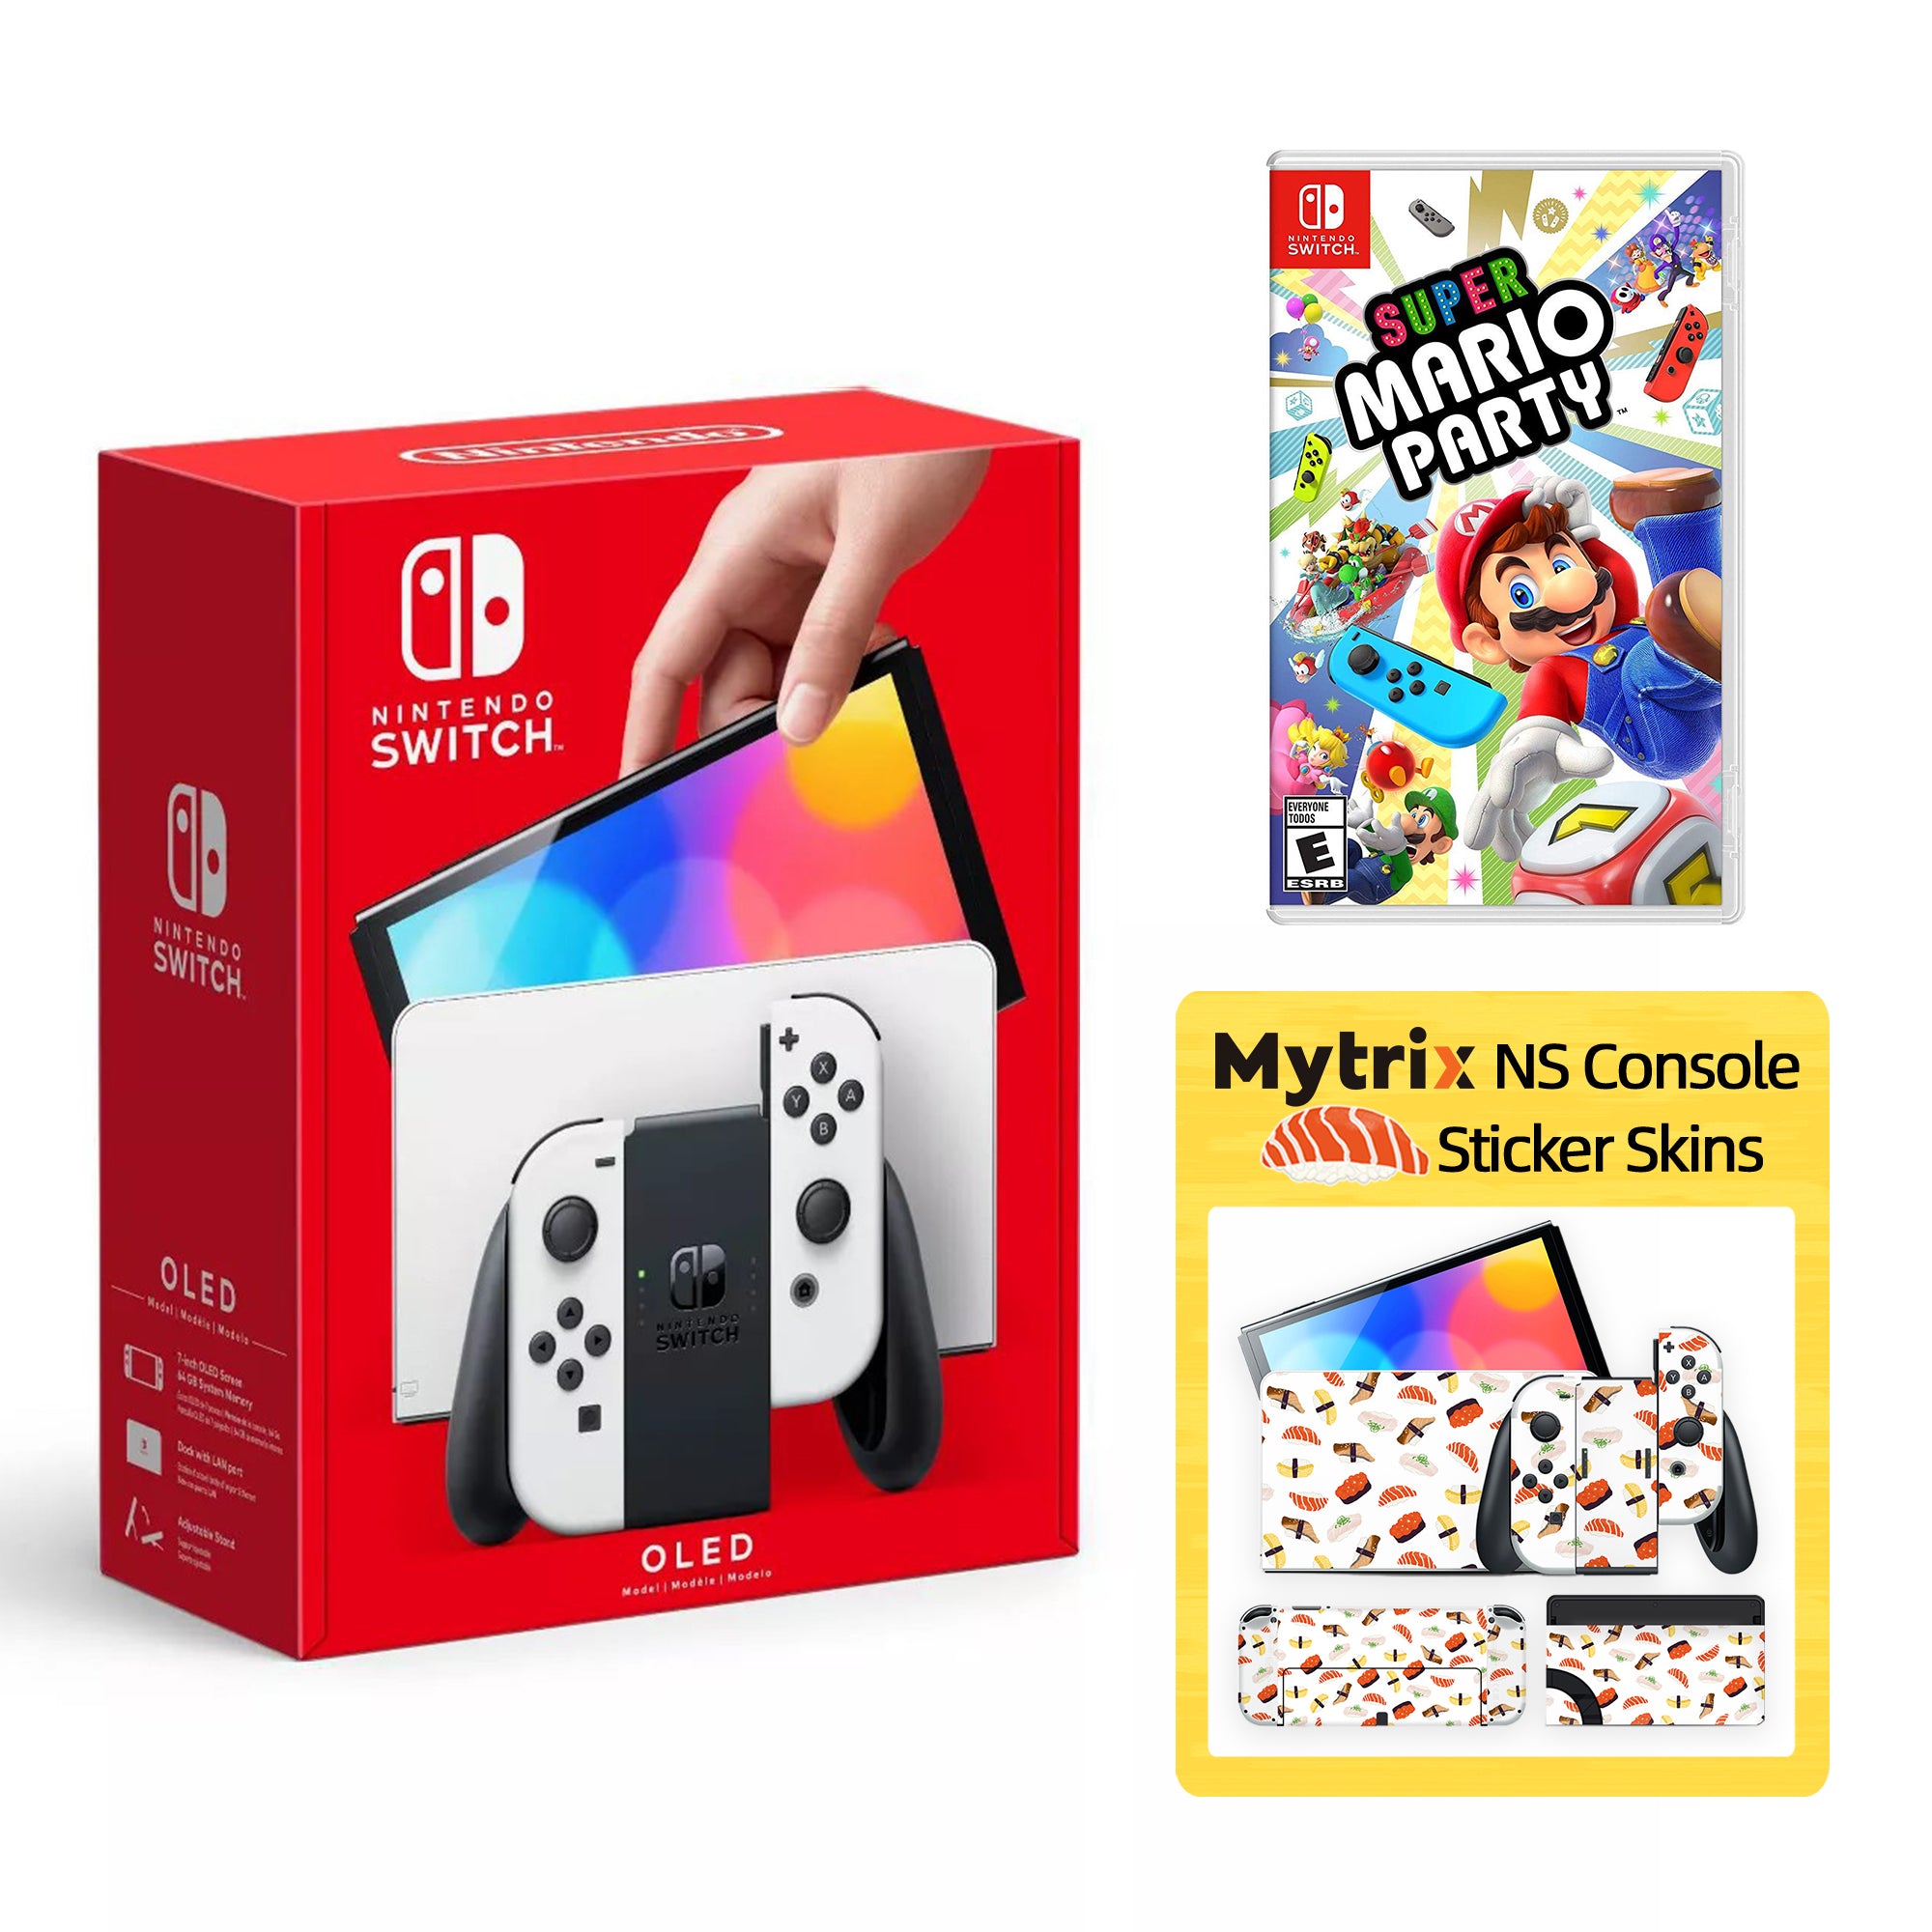 2022 New Nintendo Switch OLED Model Neon Red Blue with Super Mario Party and Mytrix Full Body Skin Sticker for NS OLED Console, Dock and Joycons - Sakura Pink